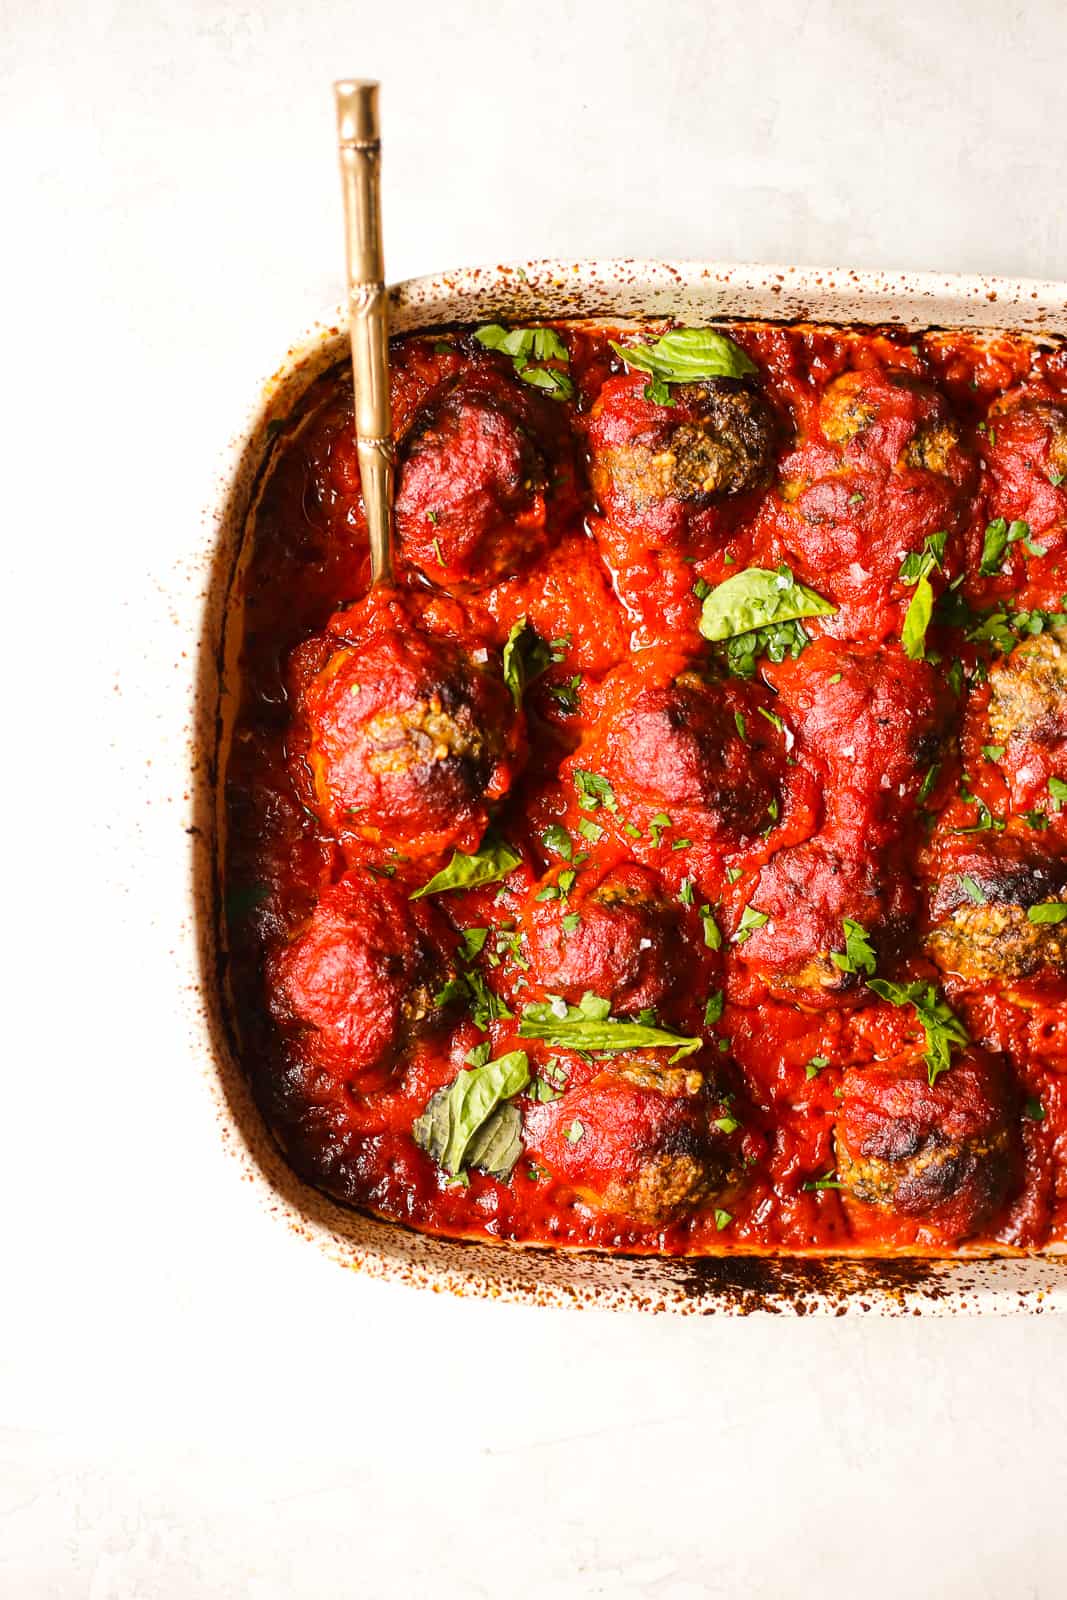 epic whole30 baked meatballs